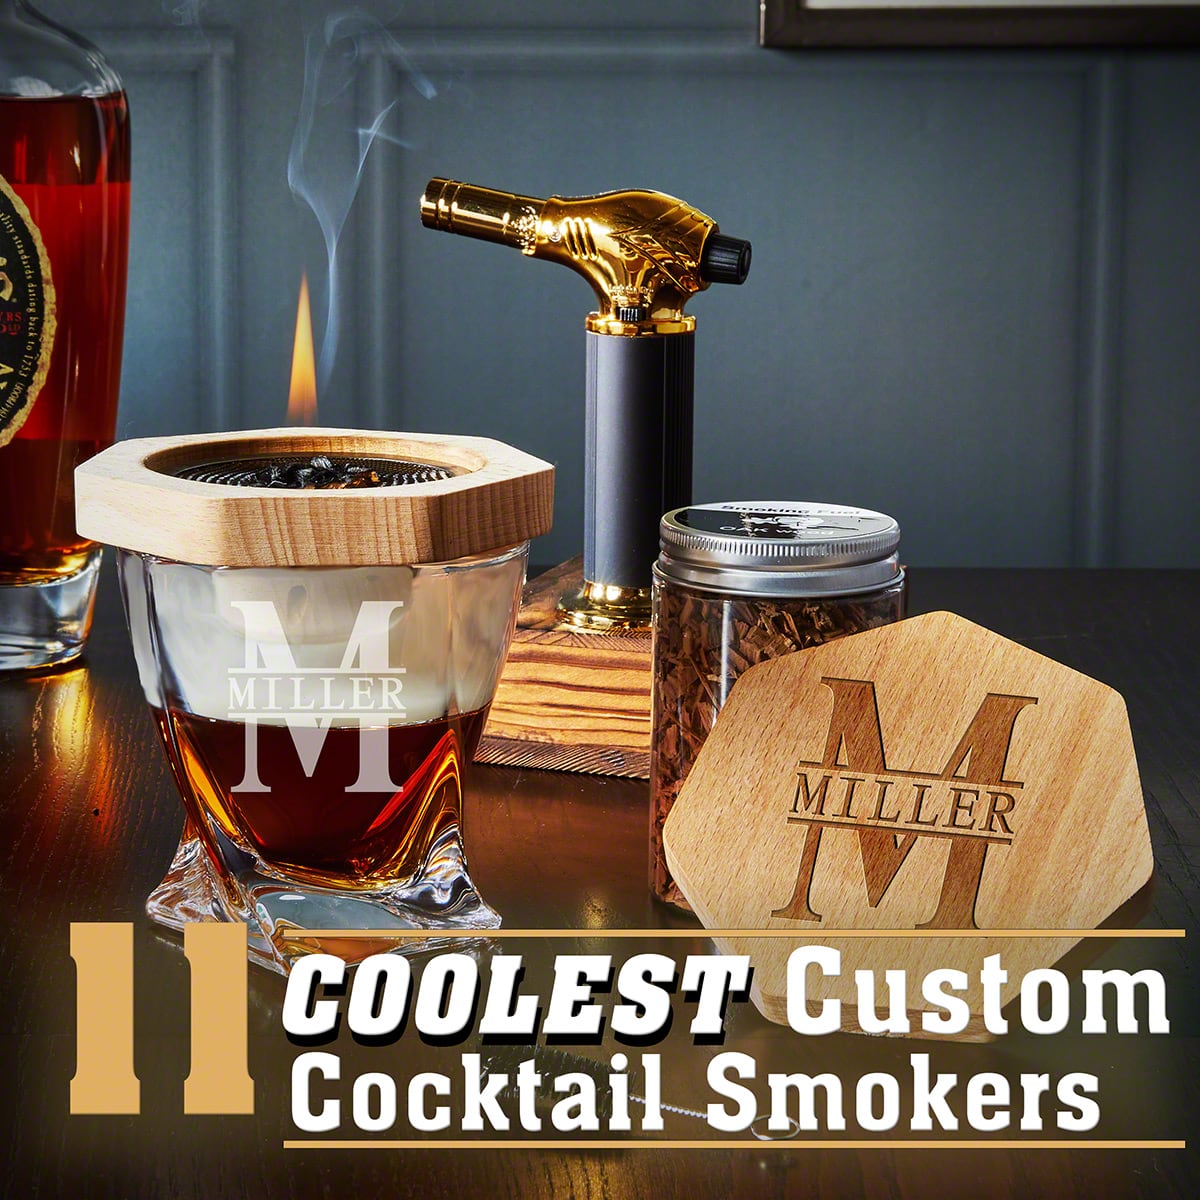 11 Coolest Custom Cocktail Smokers